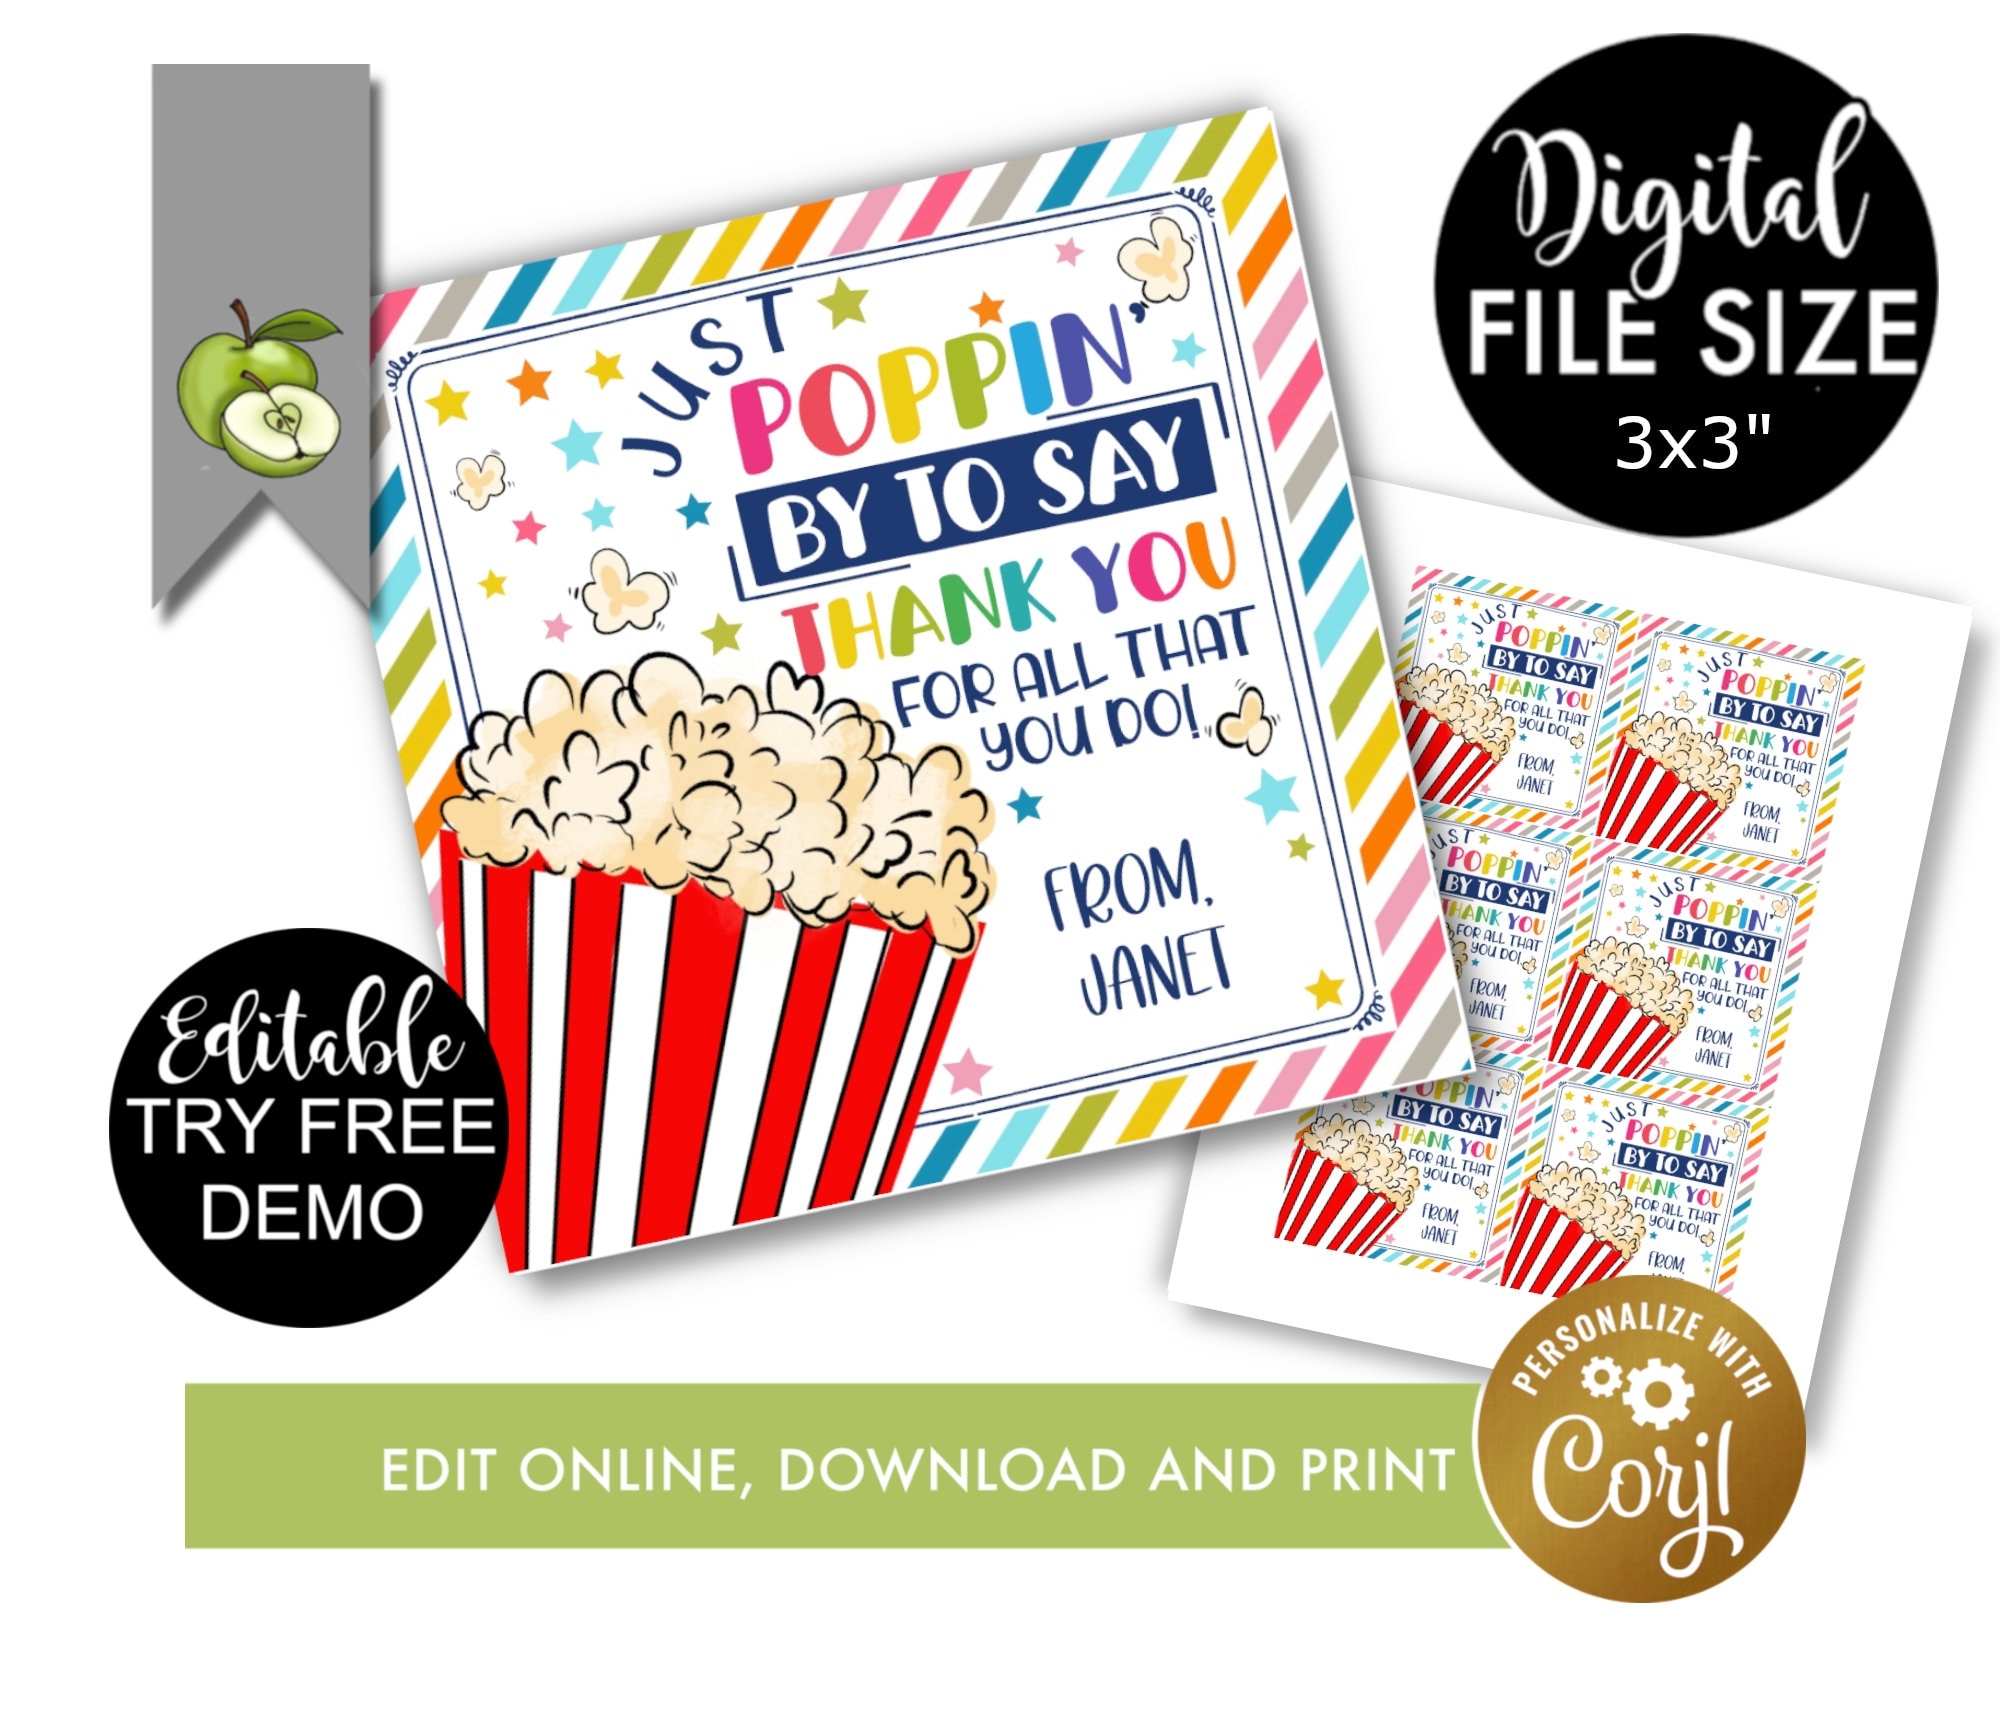 Teacher Popcorn Editable Printable Gift Tag Thanks For Popping By Meet The Parent Teacher Pop Movie Cinema Thank You Open House Etsy